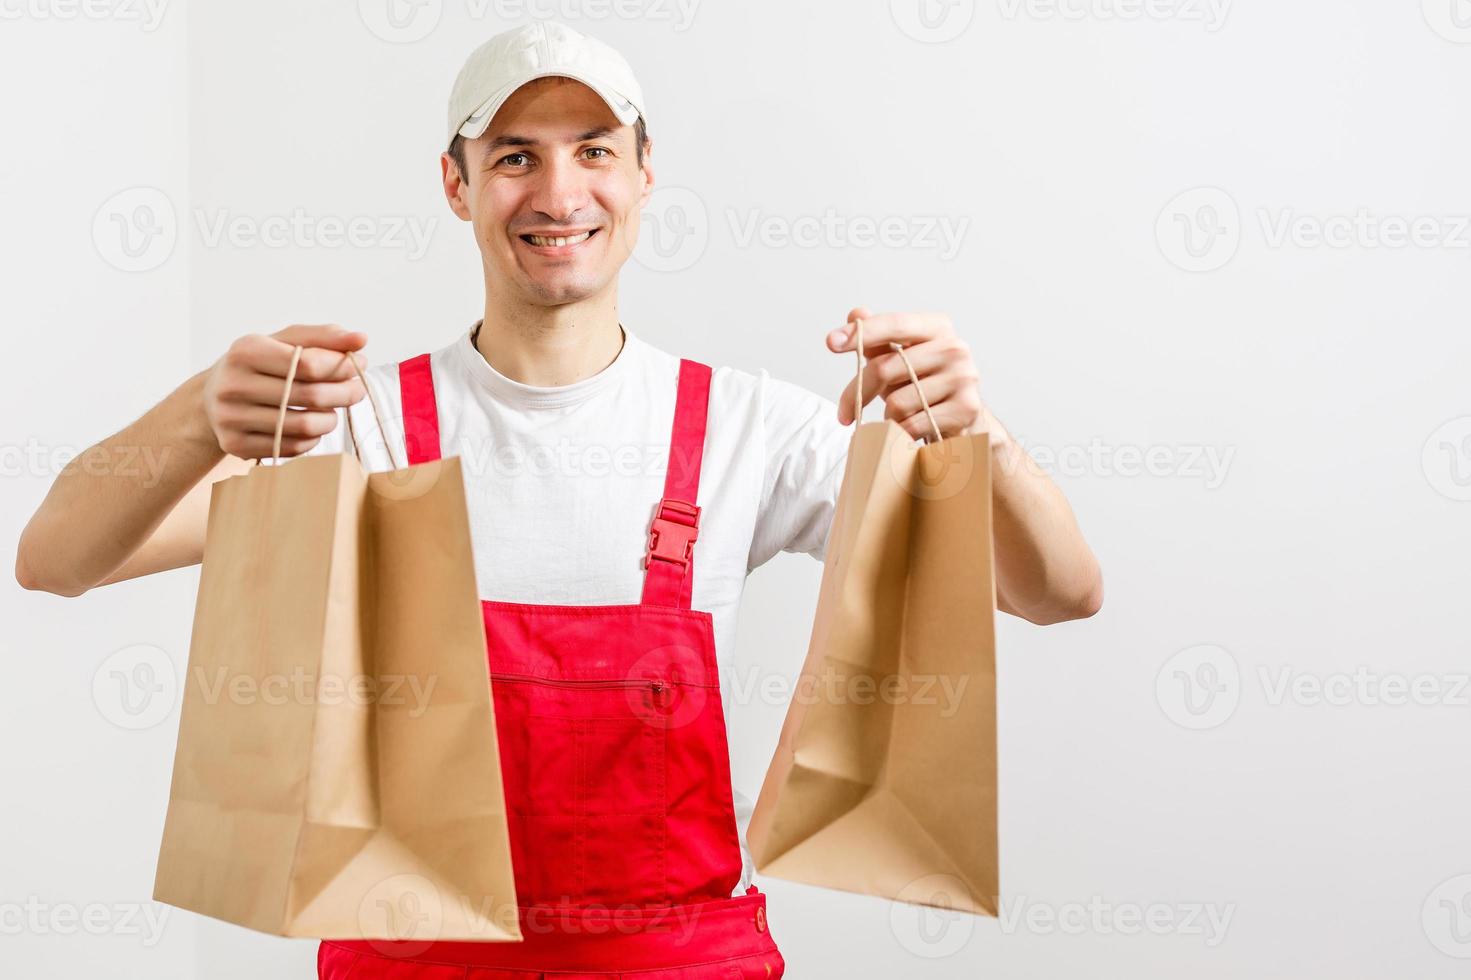 paper containers for takeaway food. Delivery man is carrying photo